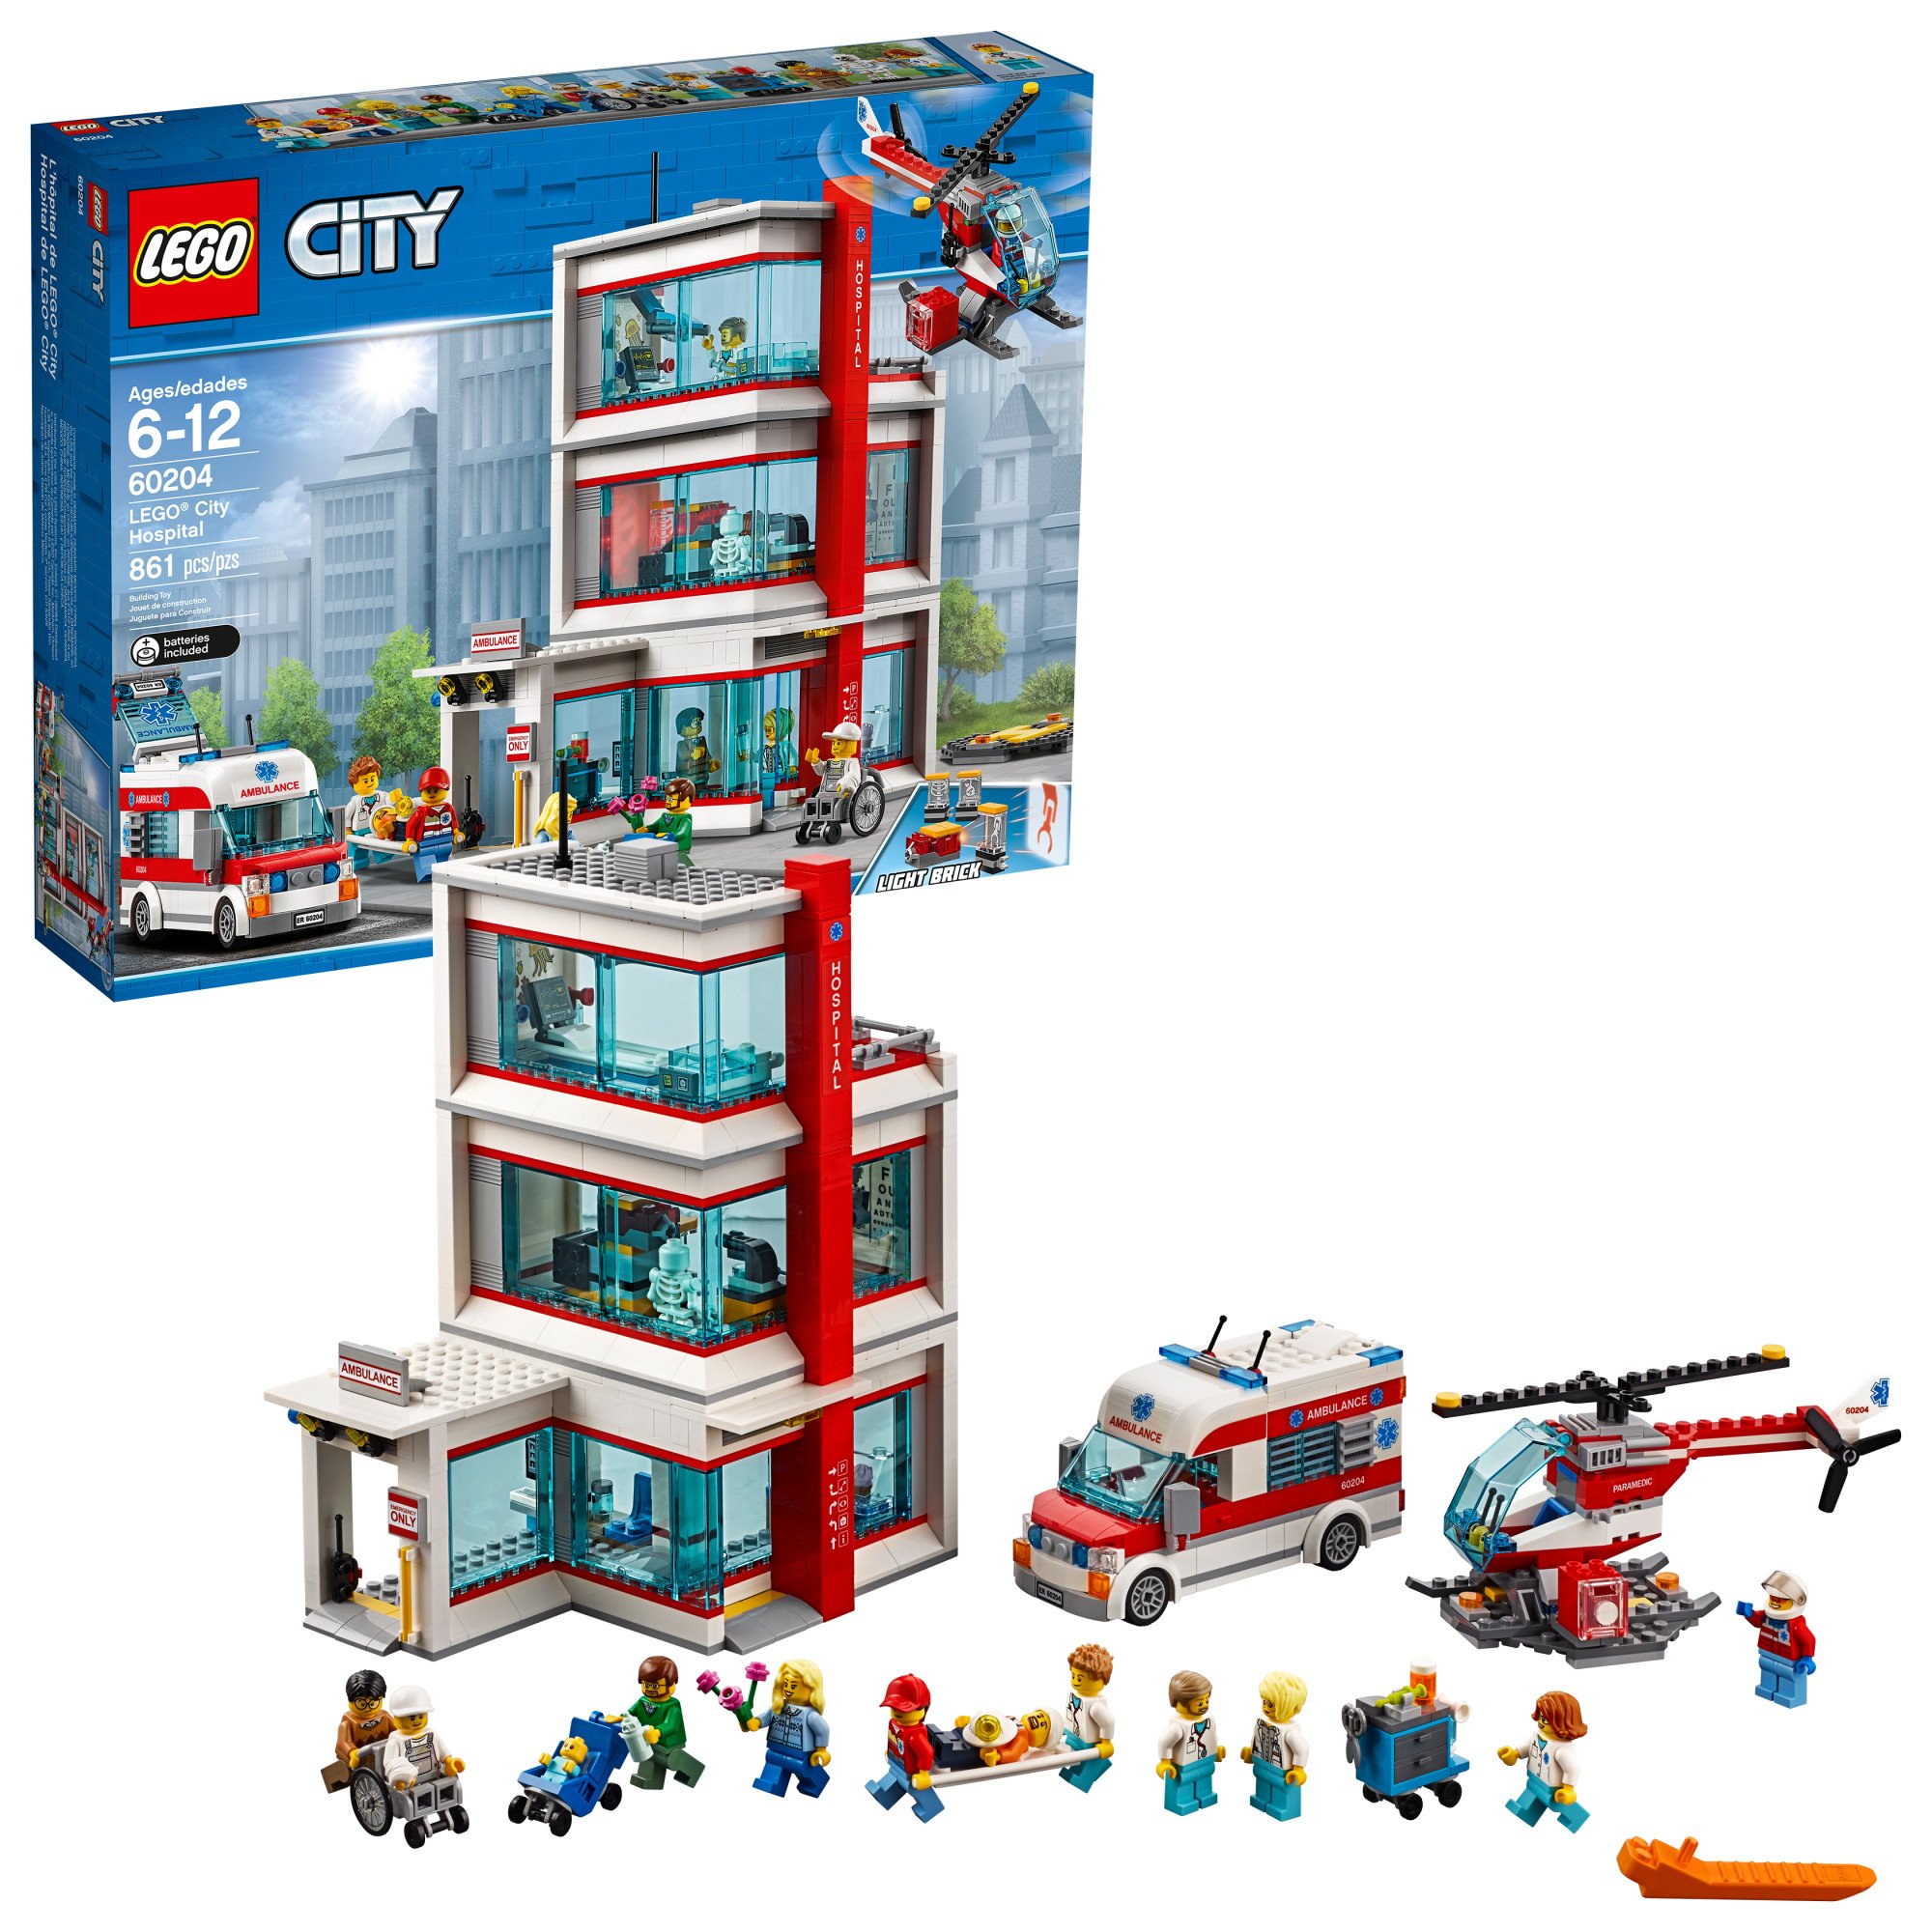 Book Cover LEGO City Hospital 60204 Building Kit (861 Pieces) (Discontinued by Manufacturer)